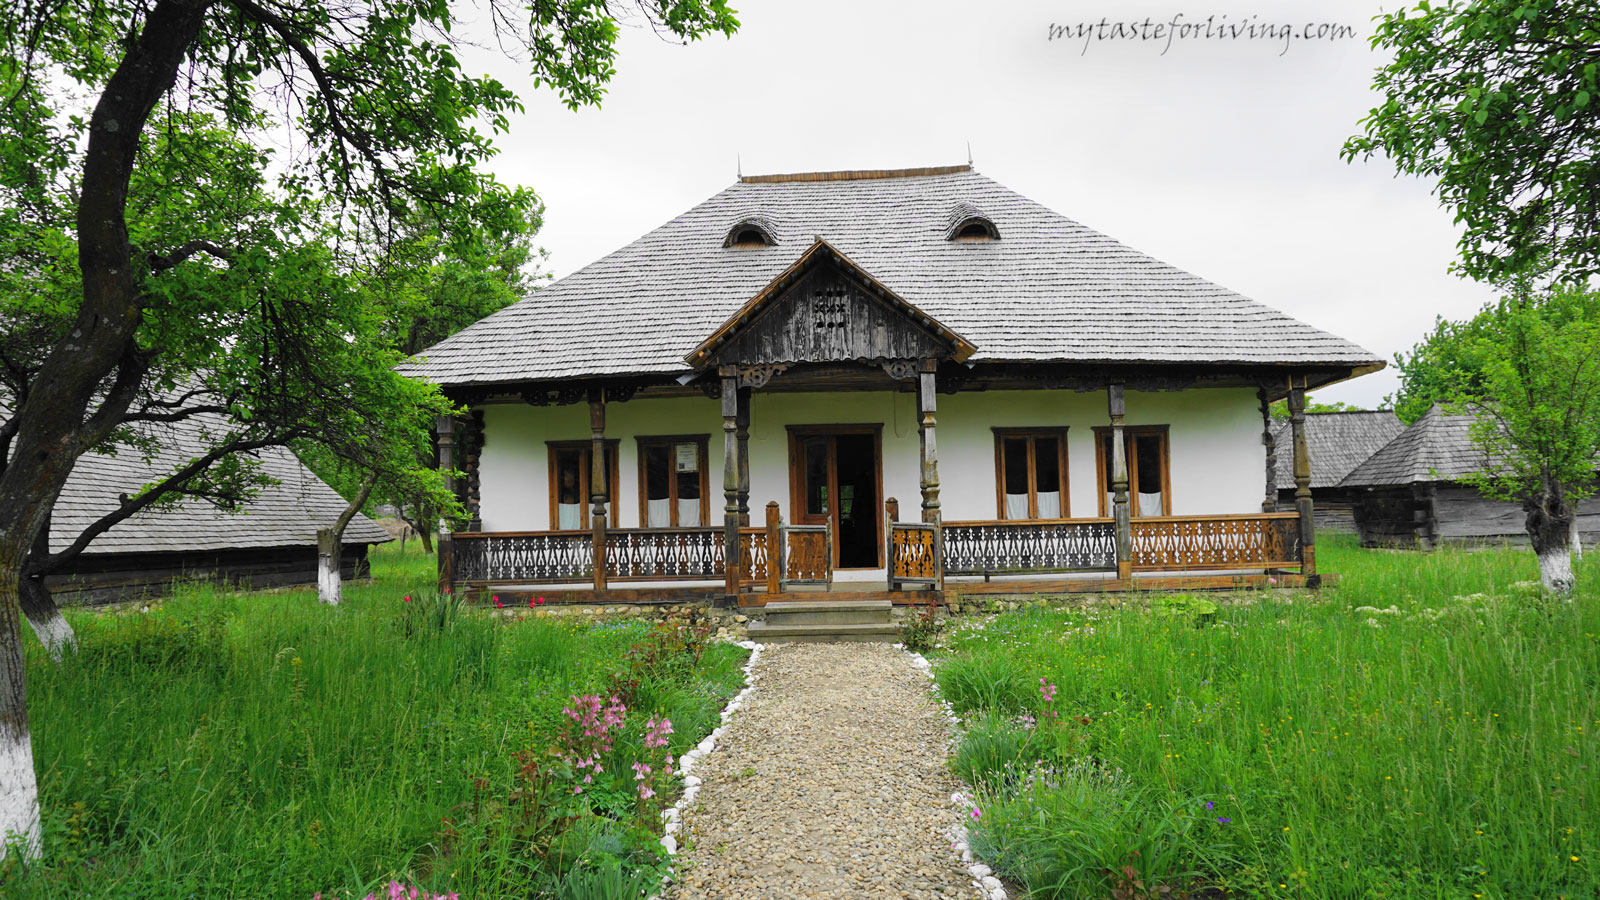 The Golesti Museum is located 10 km from Pitesti, on the left bank of the Arges river, in the village of Golesti, Romania.